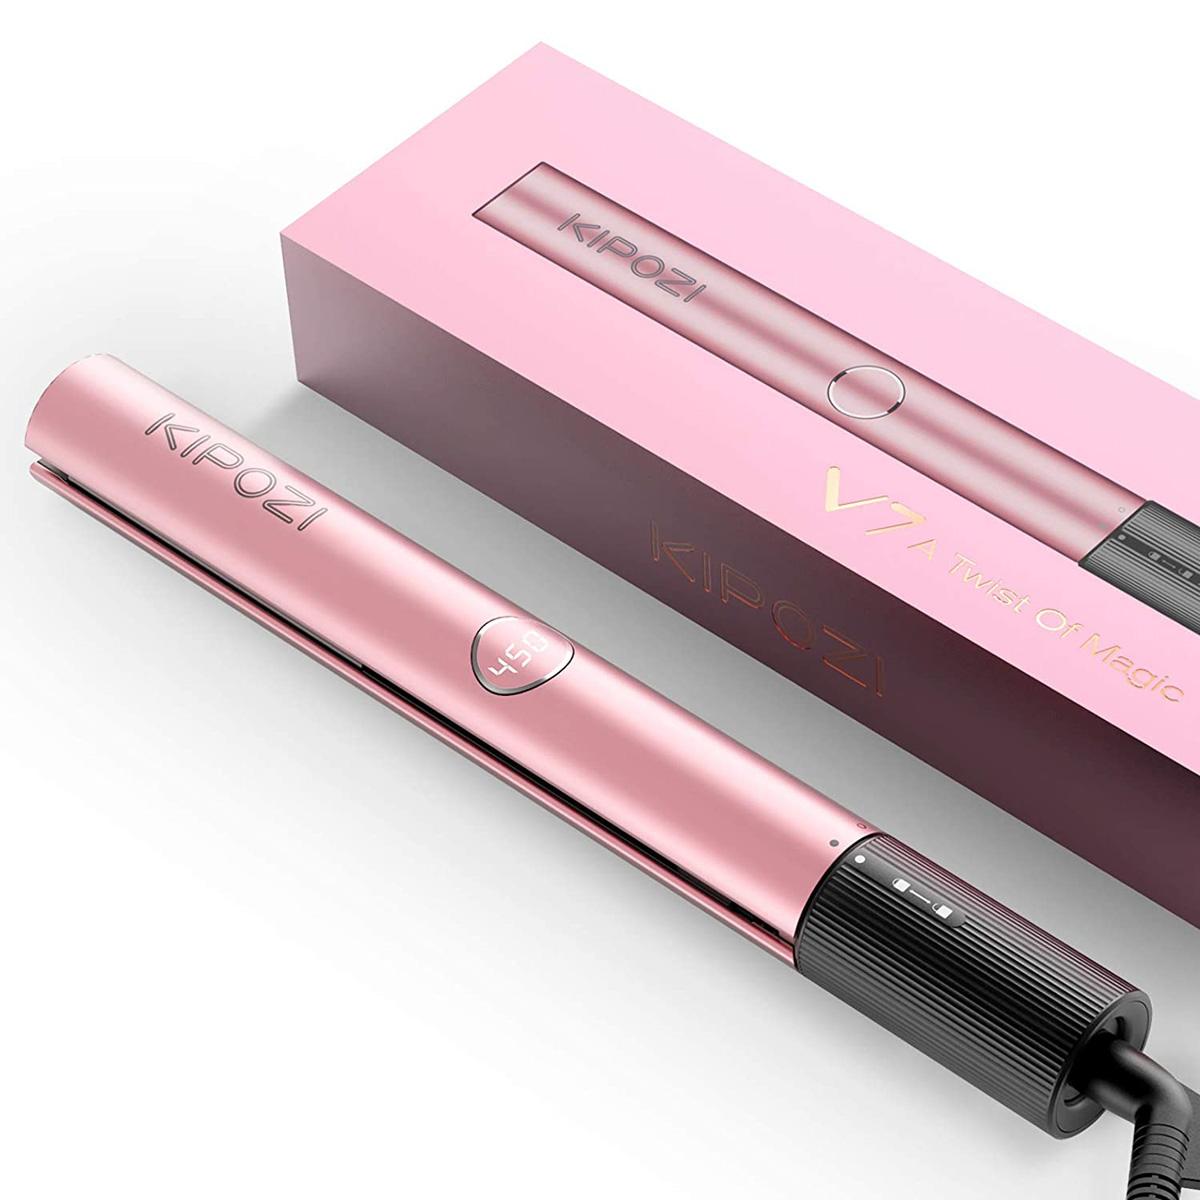 Kipozi 2 in 1 Hair Straightener and Curling Iron for $39.80 Shipped